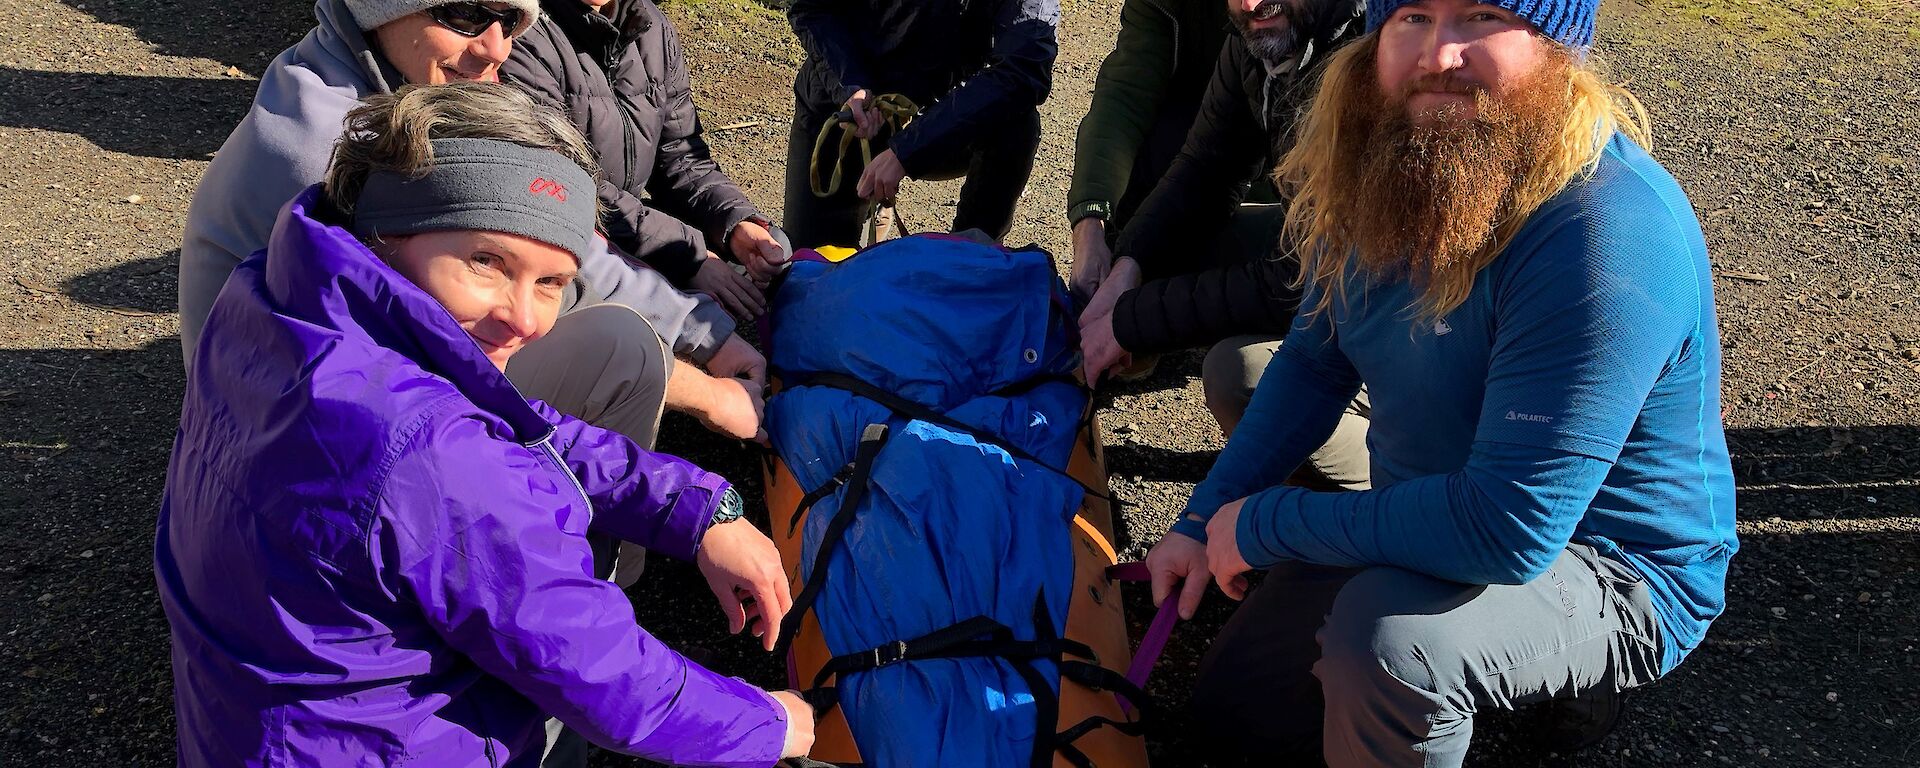 Course attendees undertake stretcher carrying training